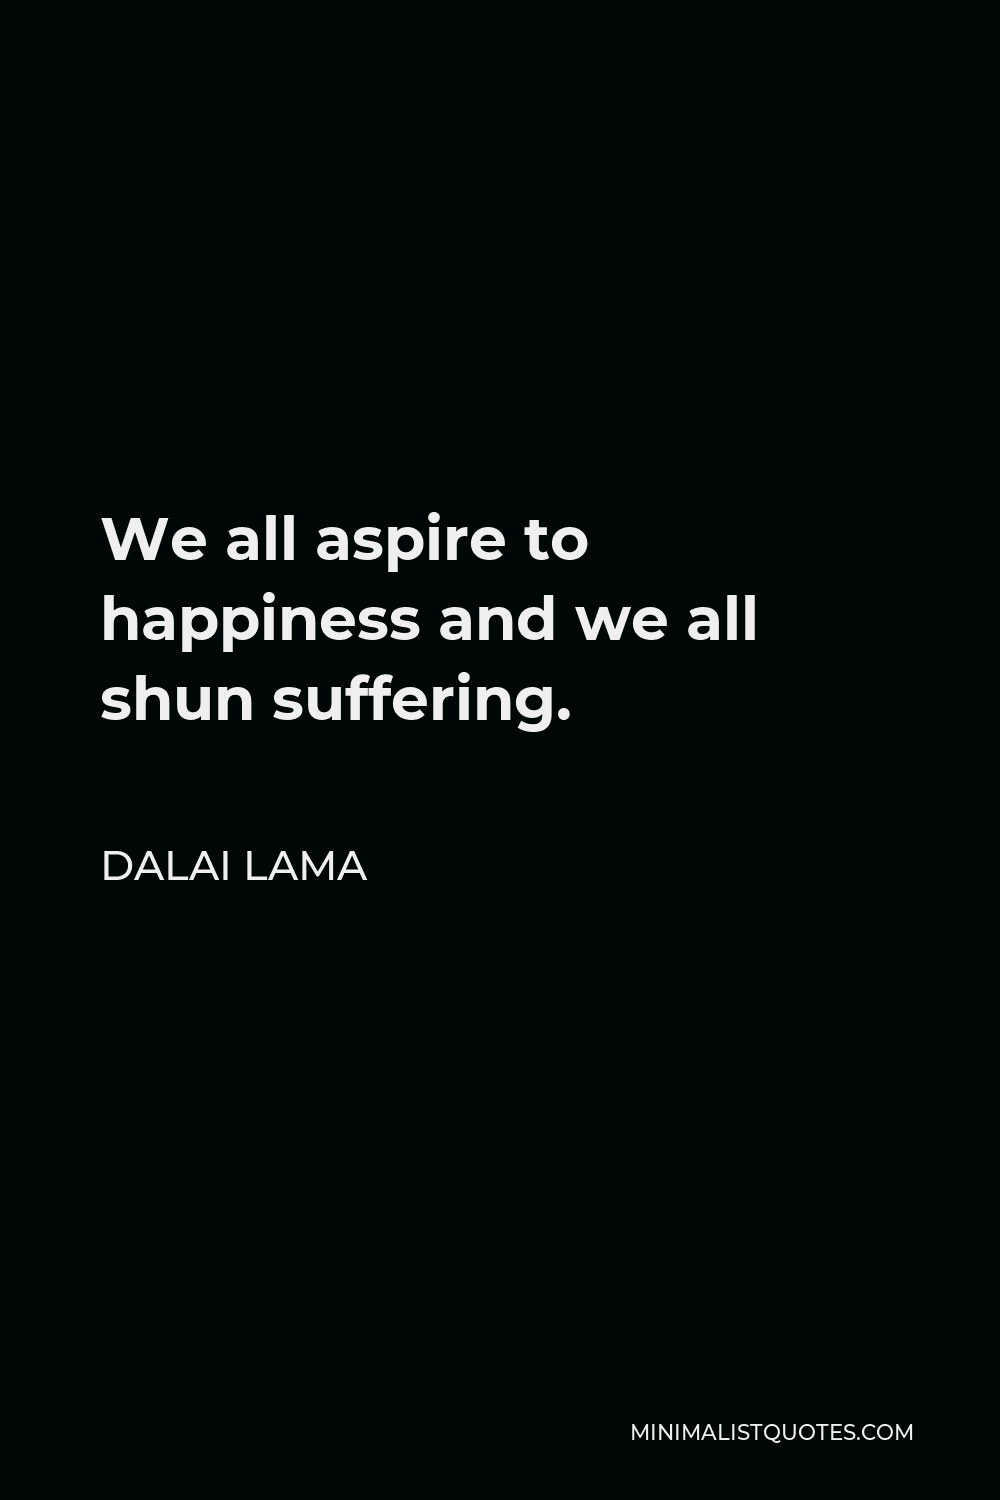 Dalai Lama Quote - We all aspire to happiness and we all shun suffering.